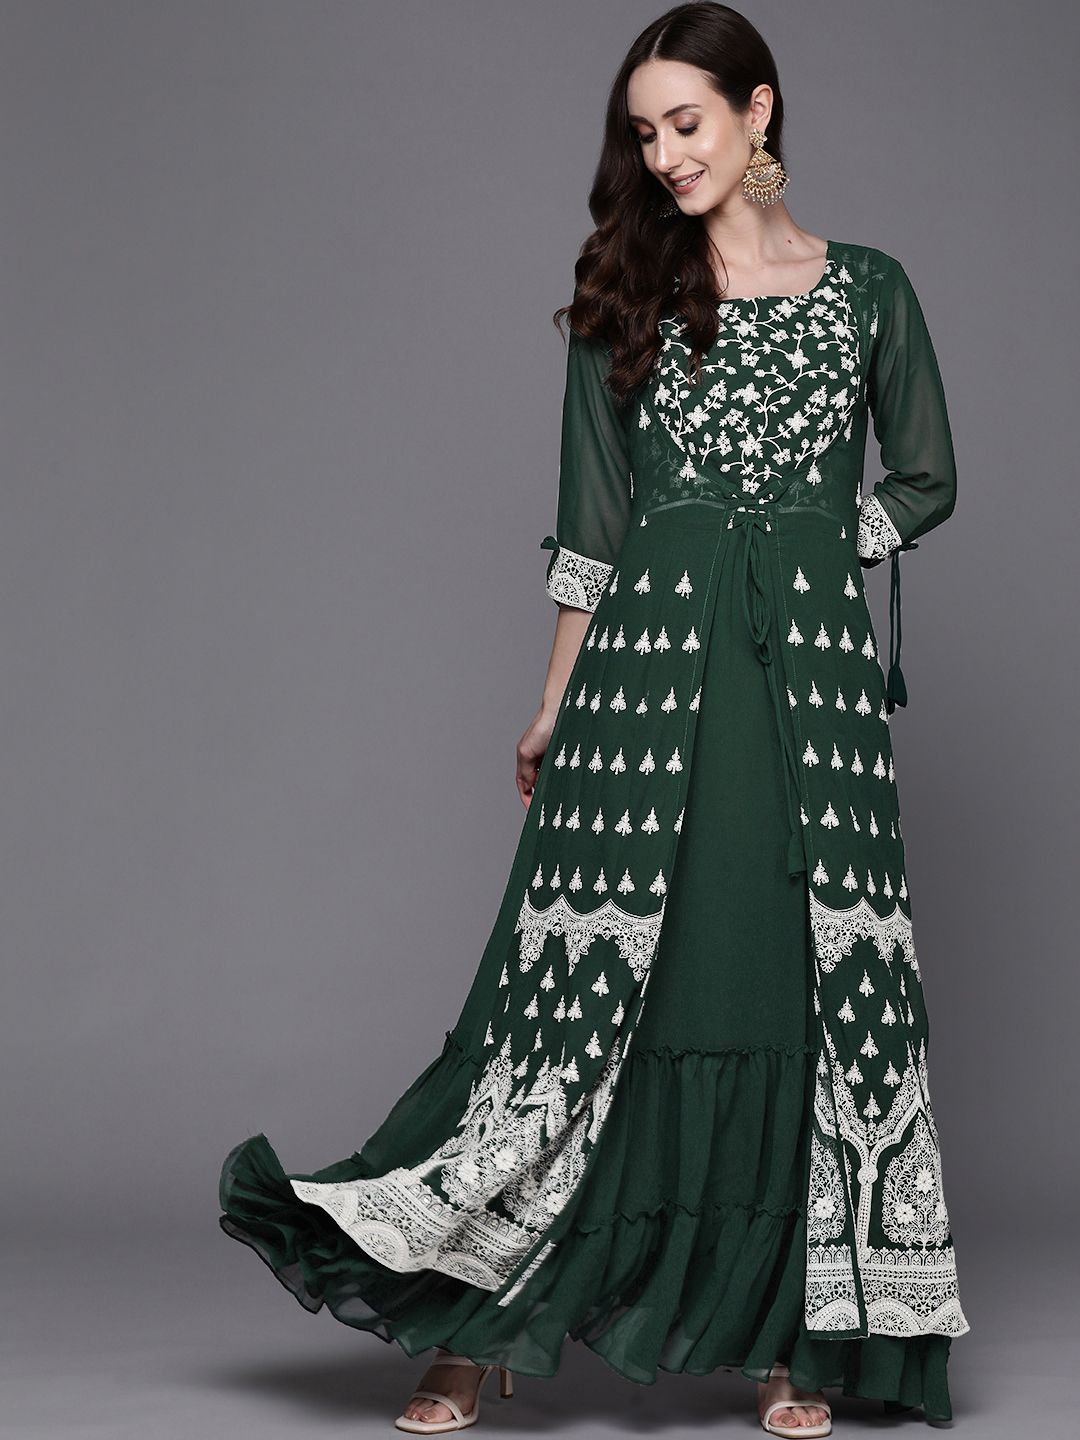 Indo Era Green Floral Embroidered Georgette Ethnic A-Line Maxi Dress Price in India